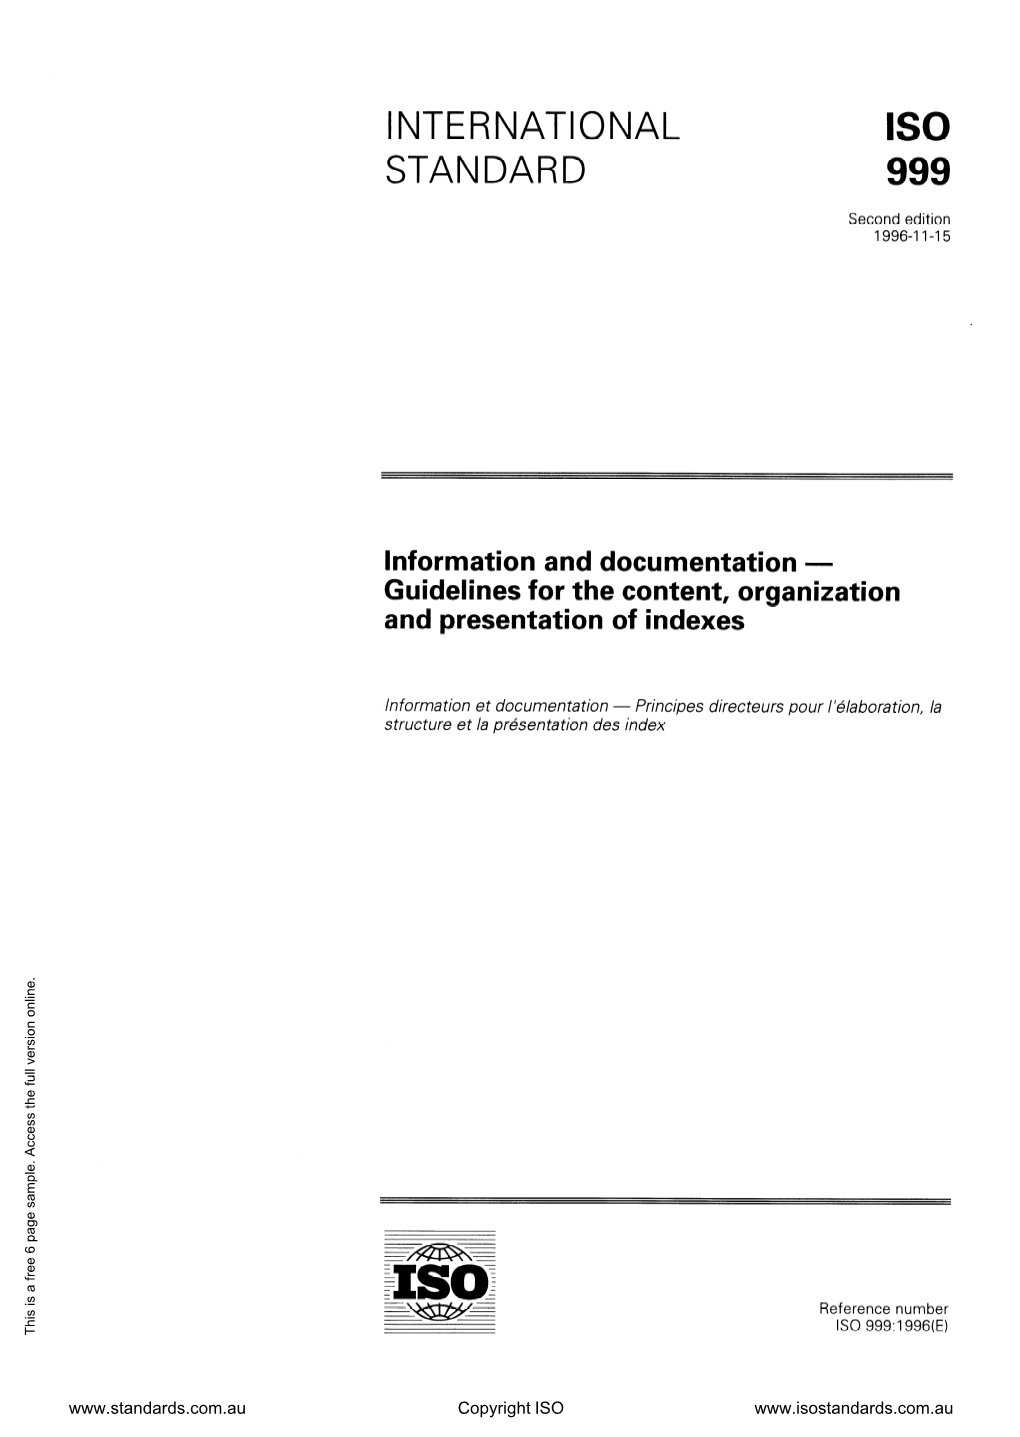 Information and Documentation - Guidelines for the Content, Organkation and Presentation of Indexes